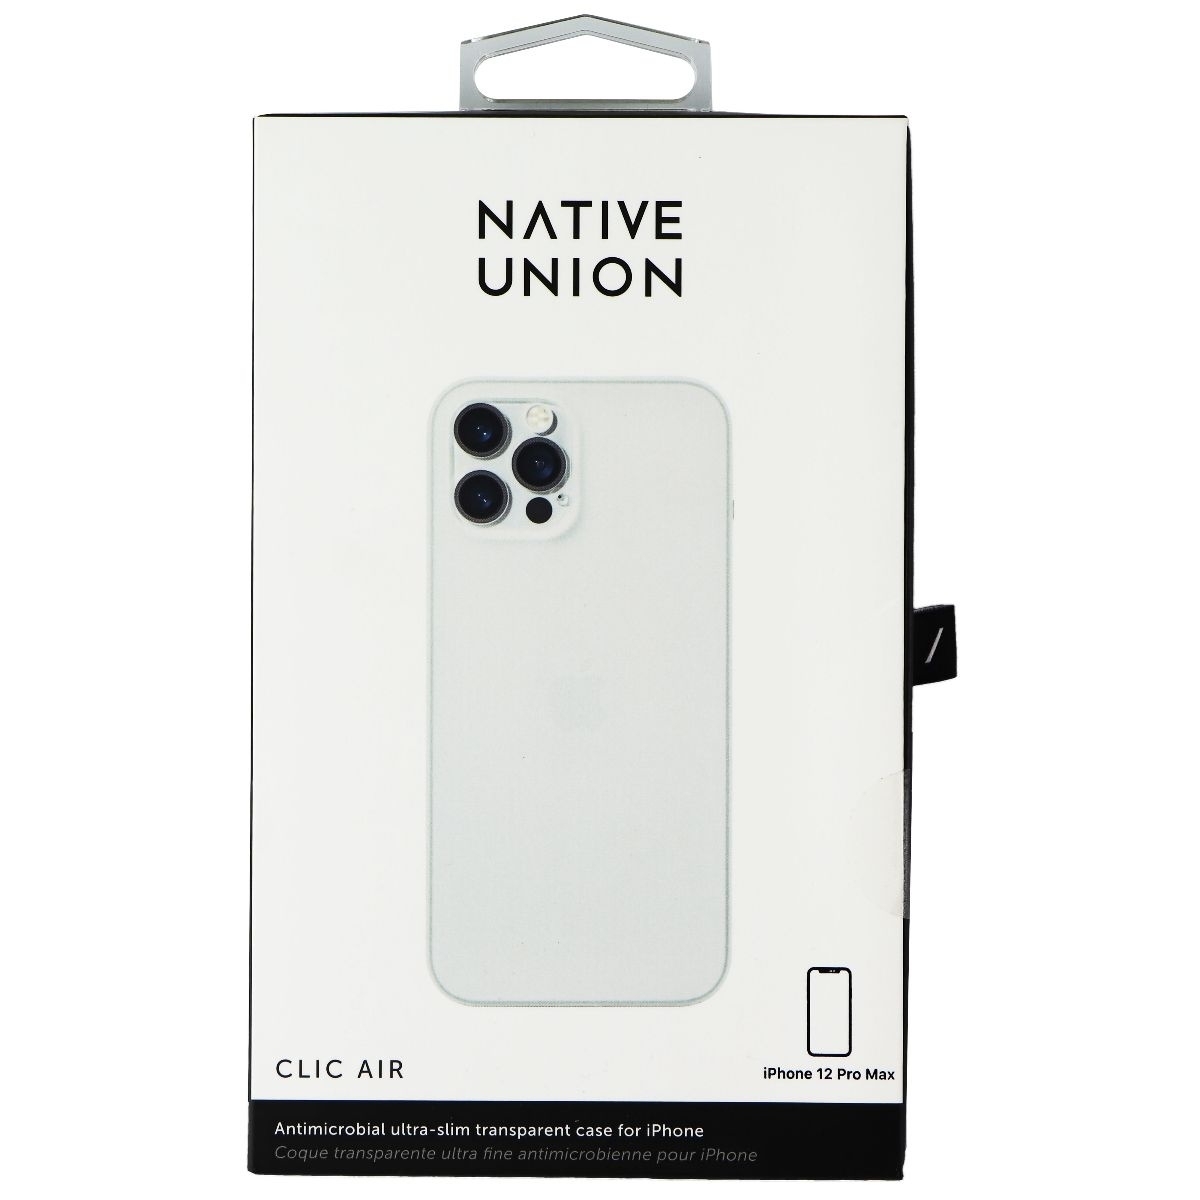 Native Union Clic Air Series Case For IPhone 12 Pro Max - Clear/Frost